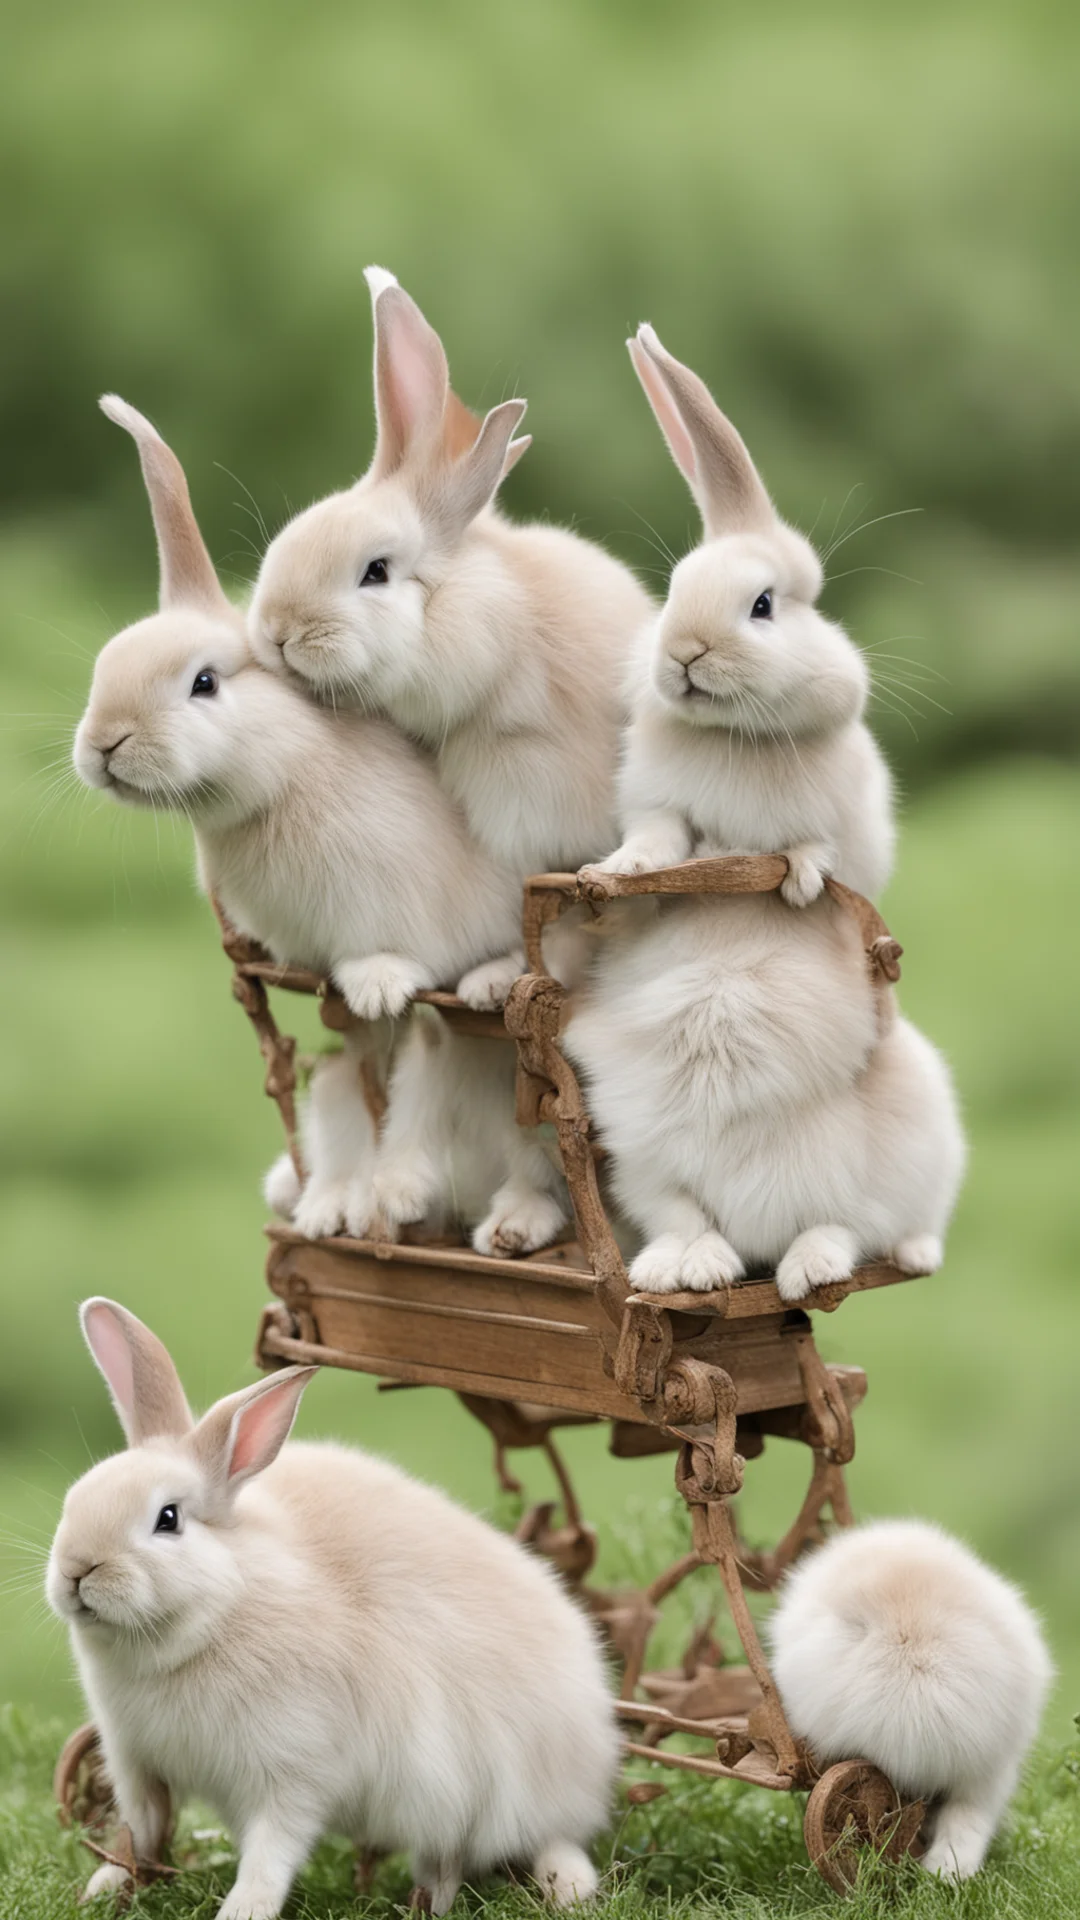 bunnies pull carriage amazing awesome portrait 2 tall